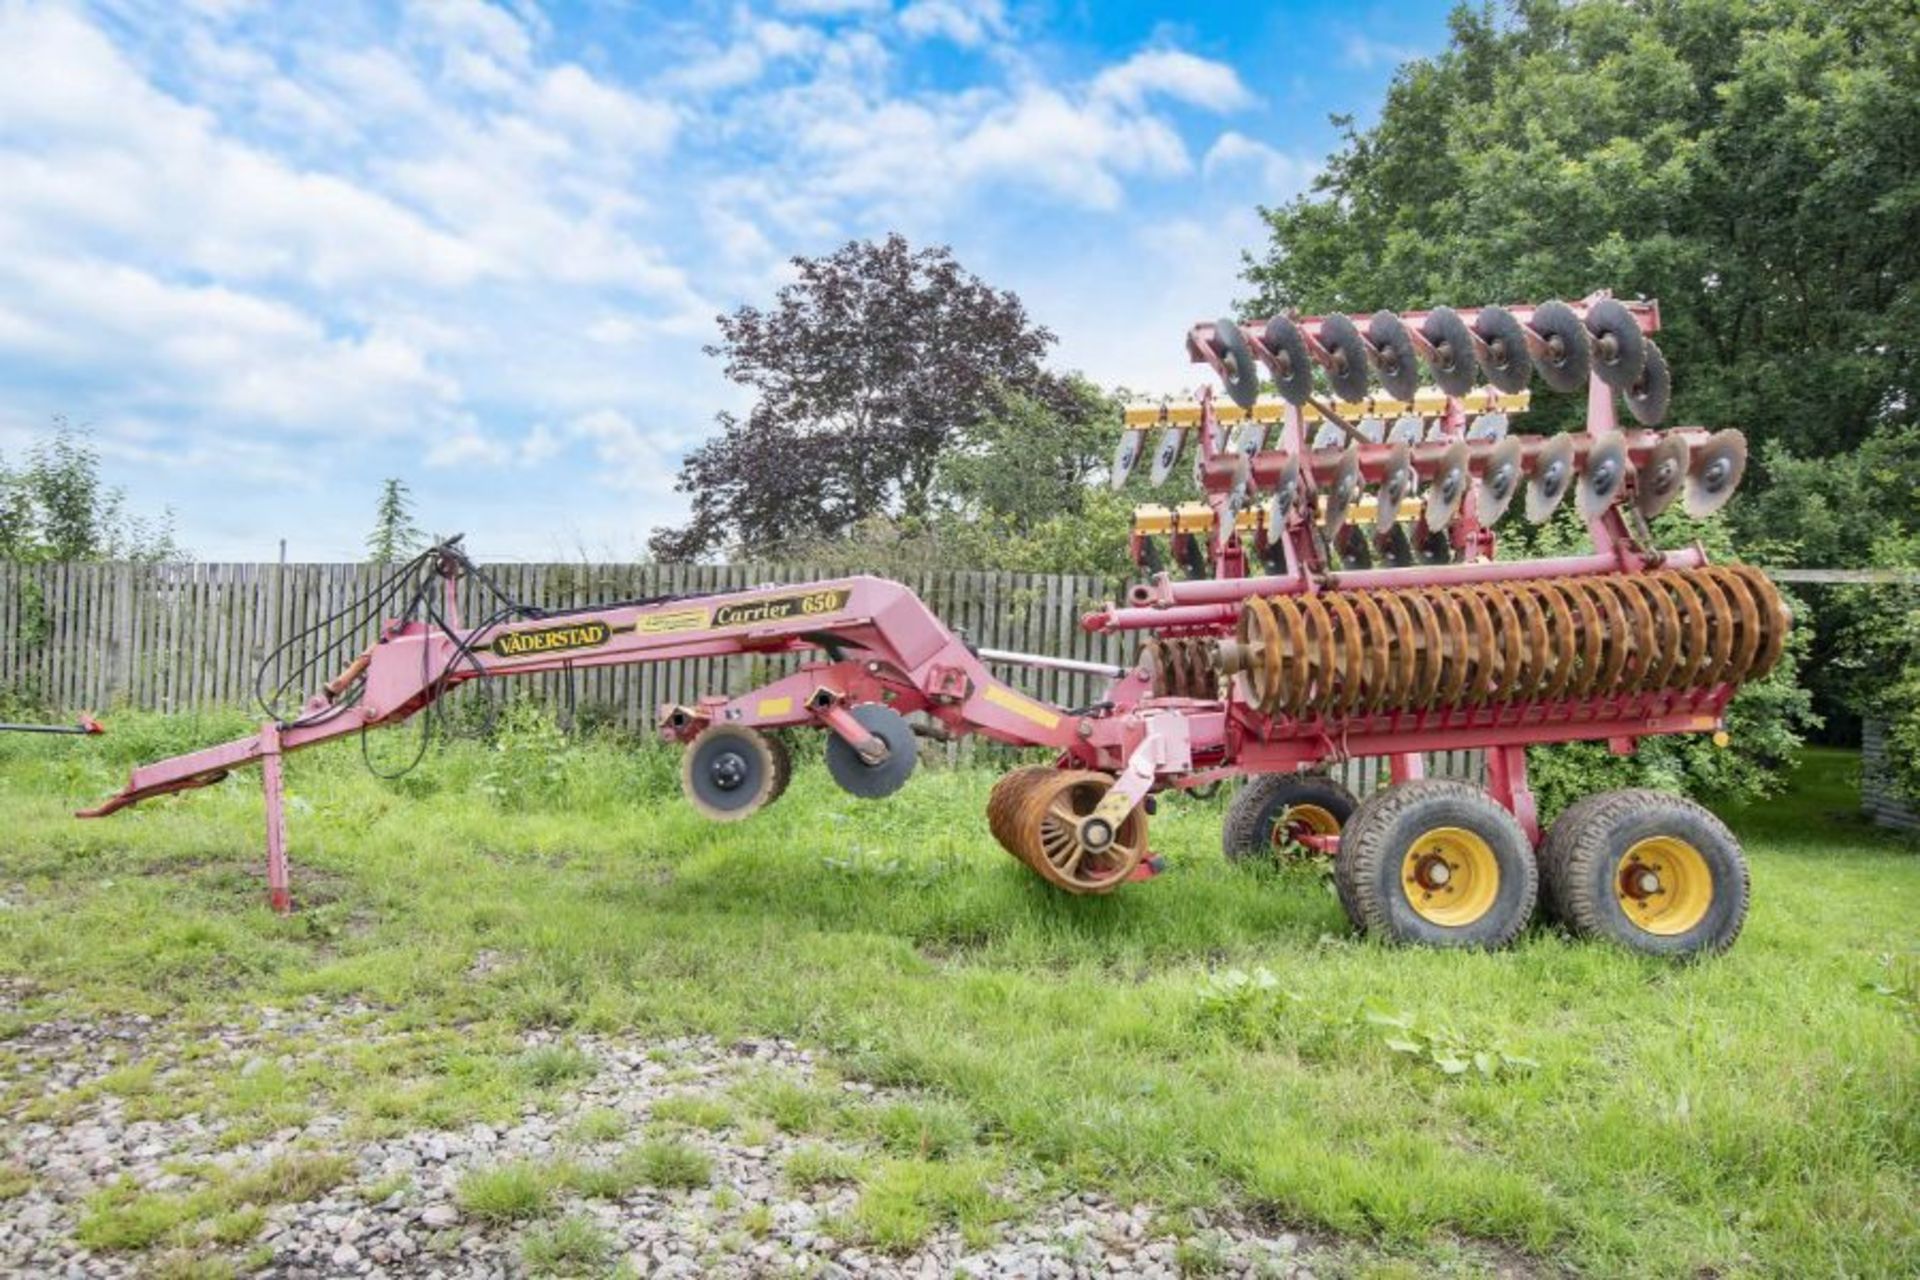 Vaderstaad Carrier 6.5m cultivator all new discs for 2021.